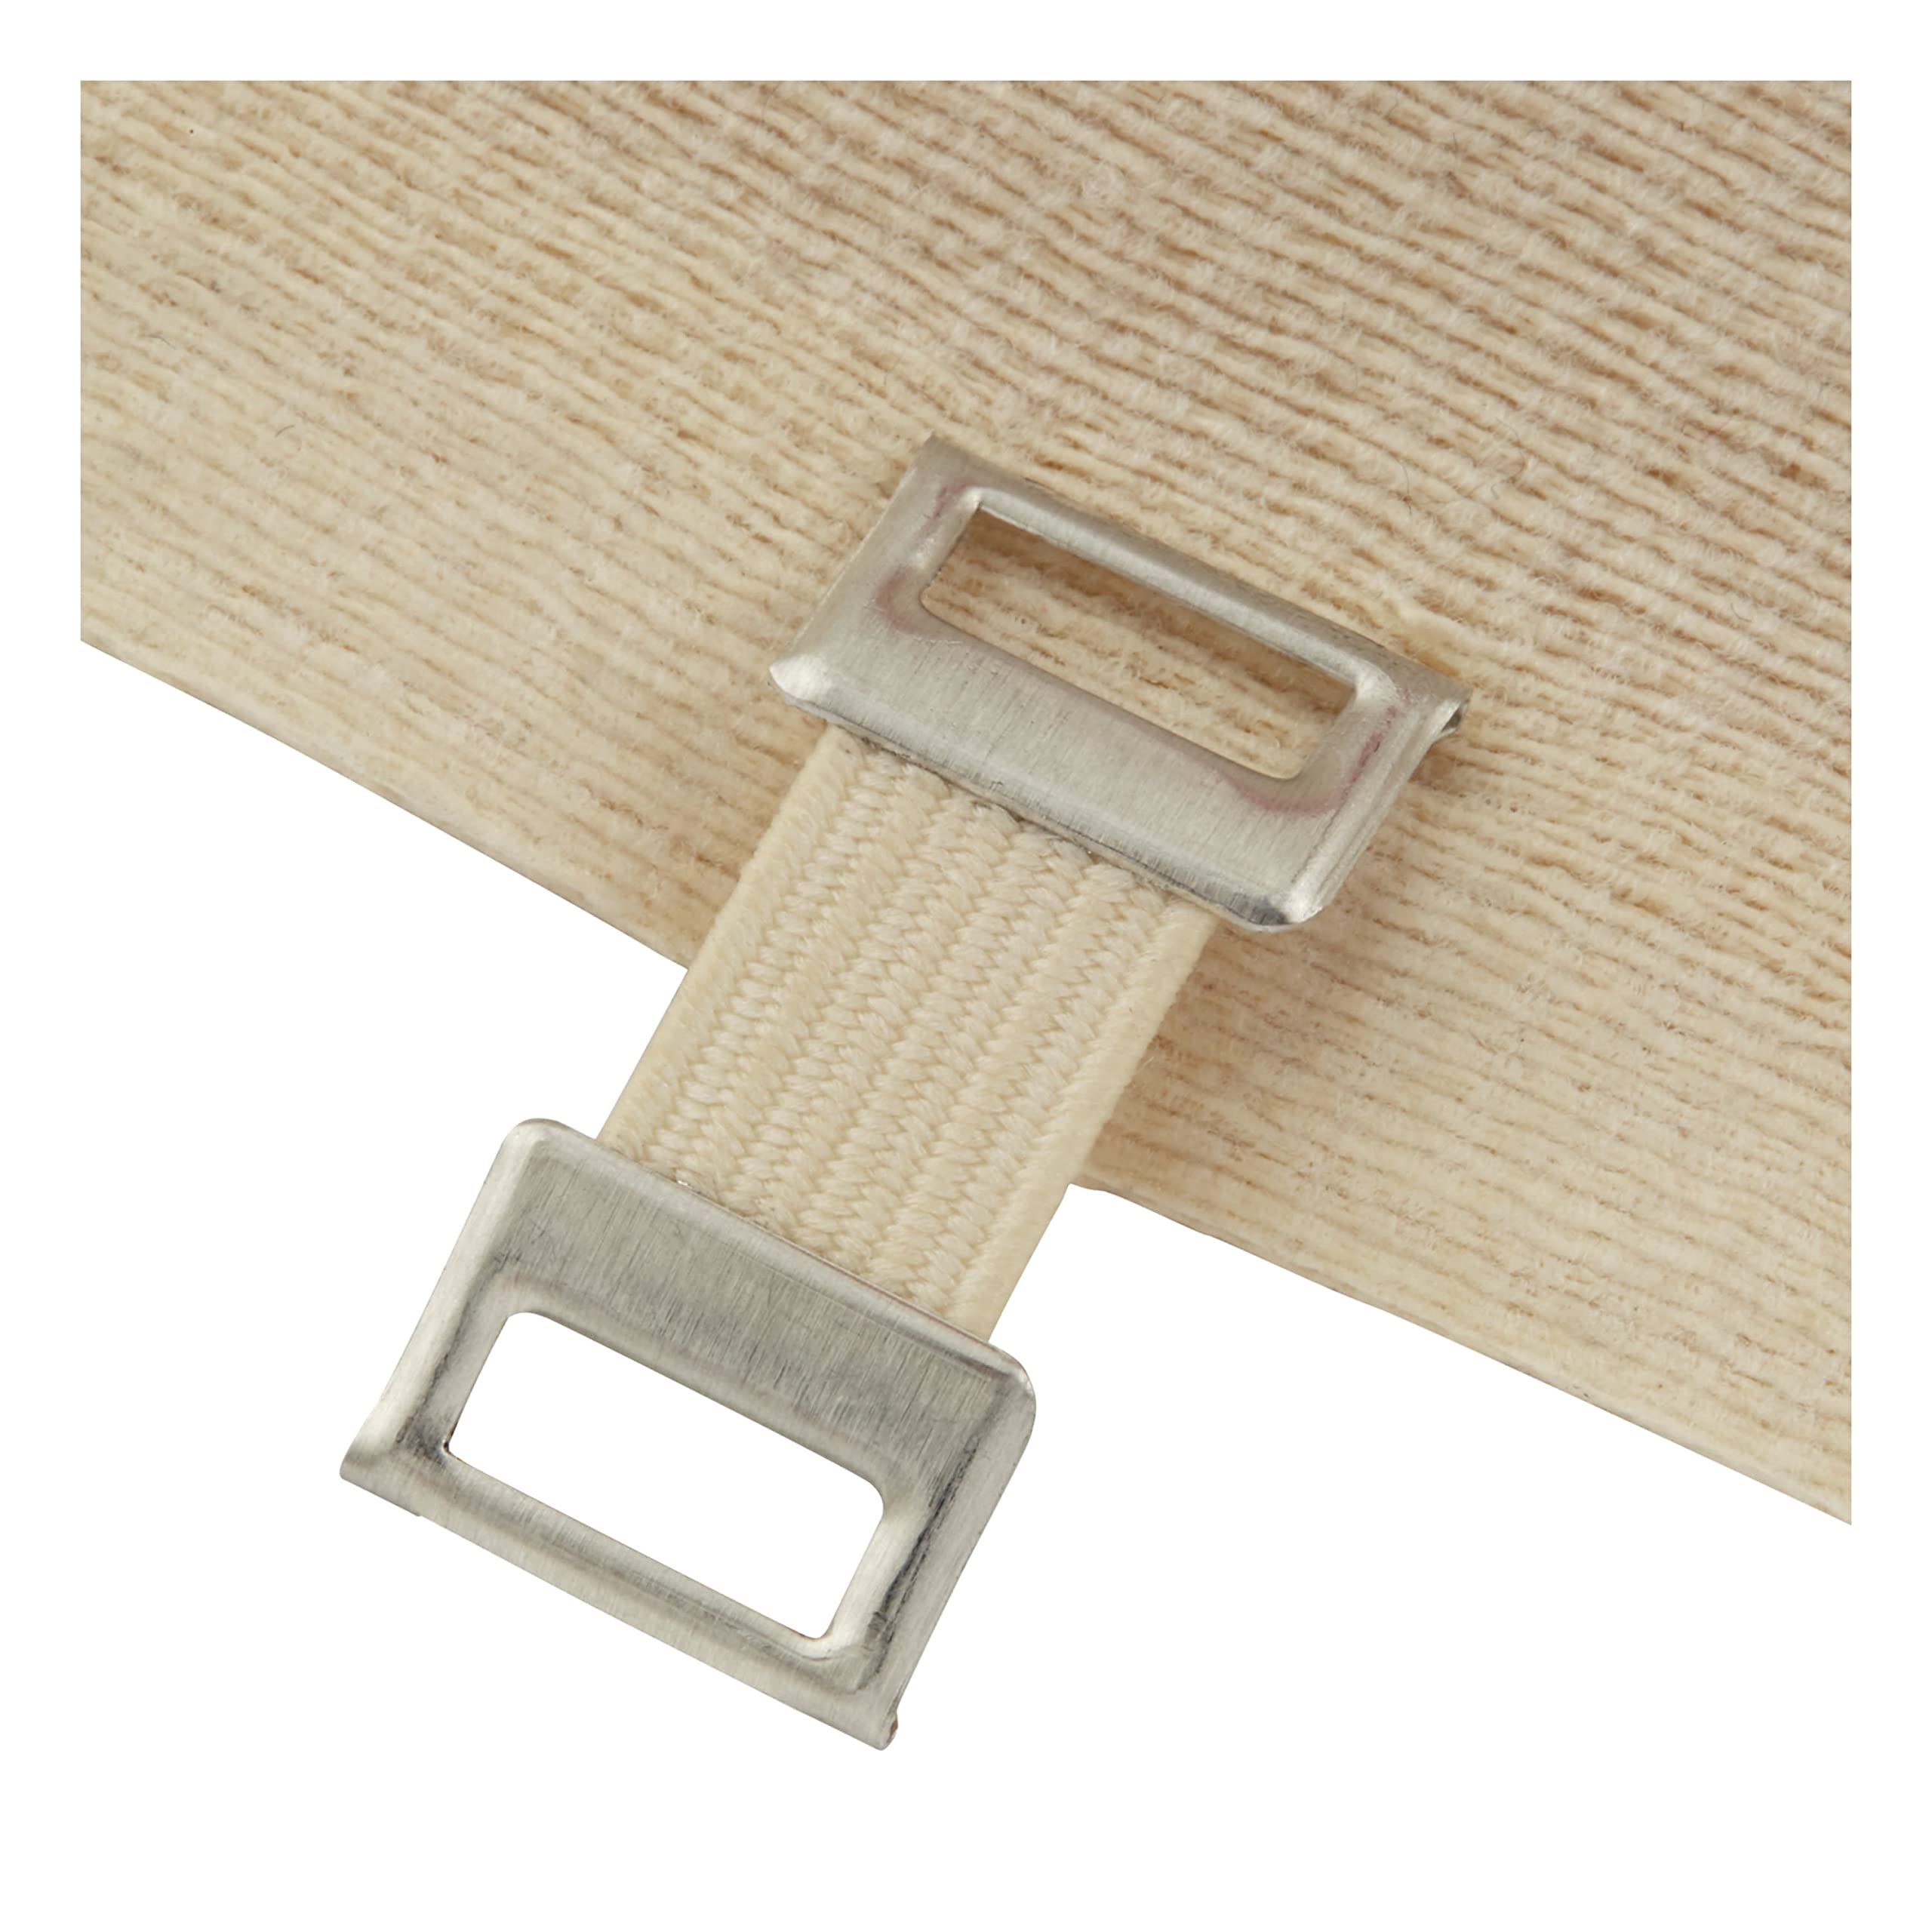 ACE 3 Inch Elastic Bandage with with Clips, Beige, Great for Elbow, Ankle, Knee and More, 1 Count